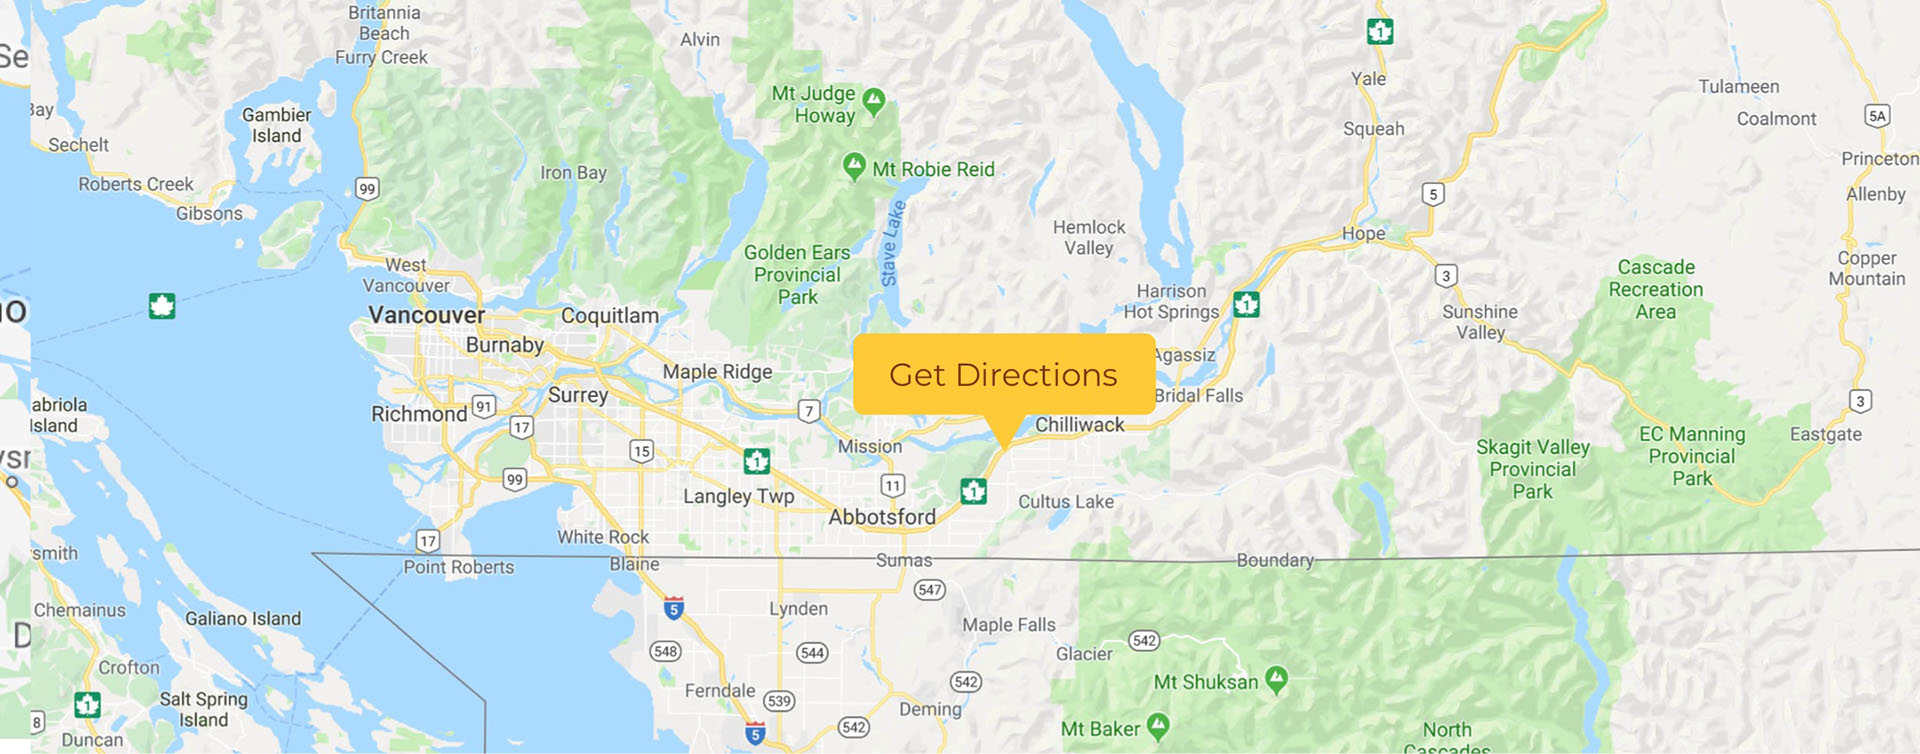 Directions to the Chilliwack sunflower festival